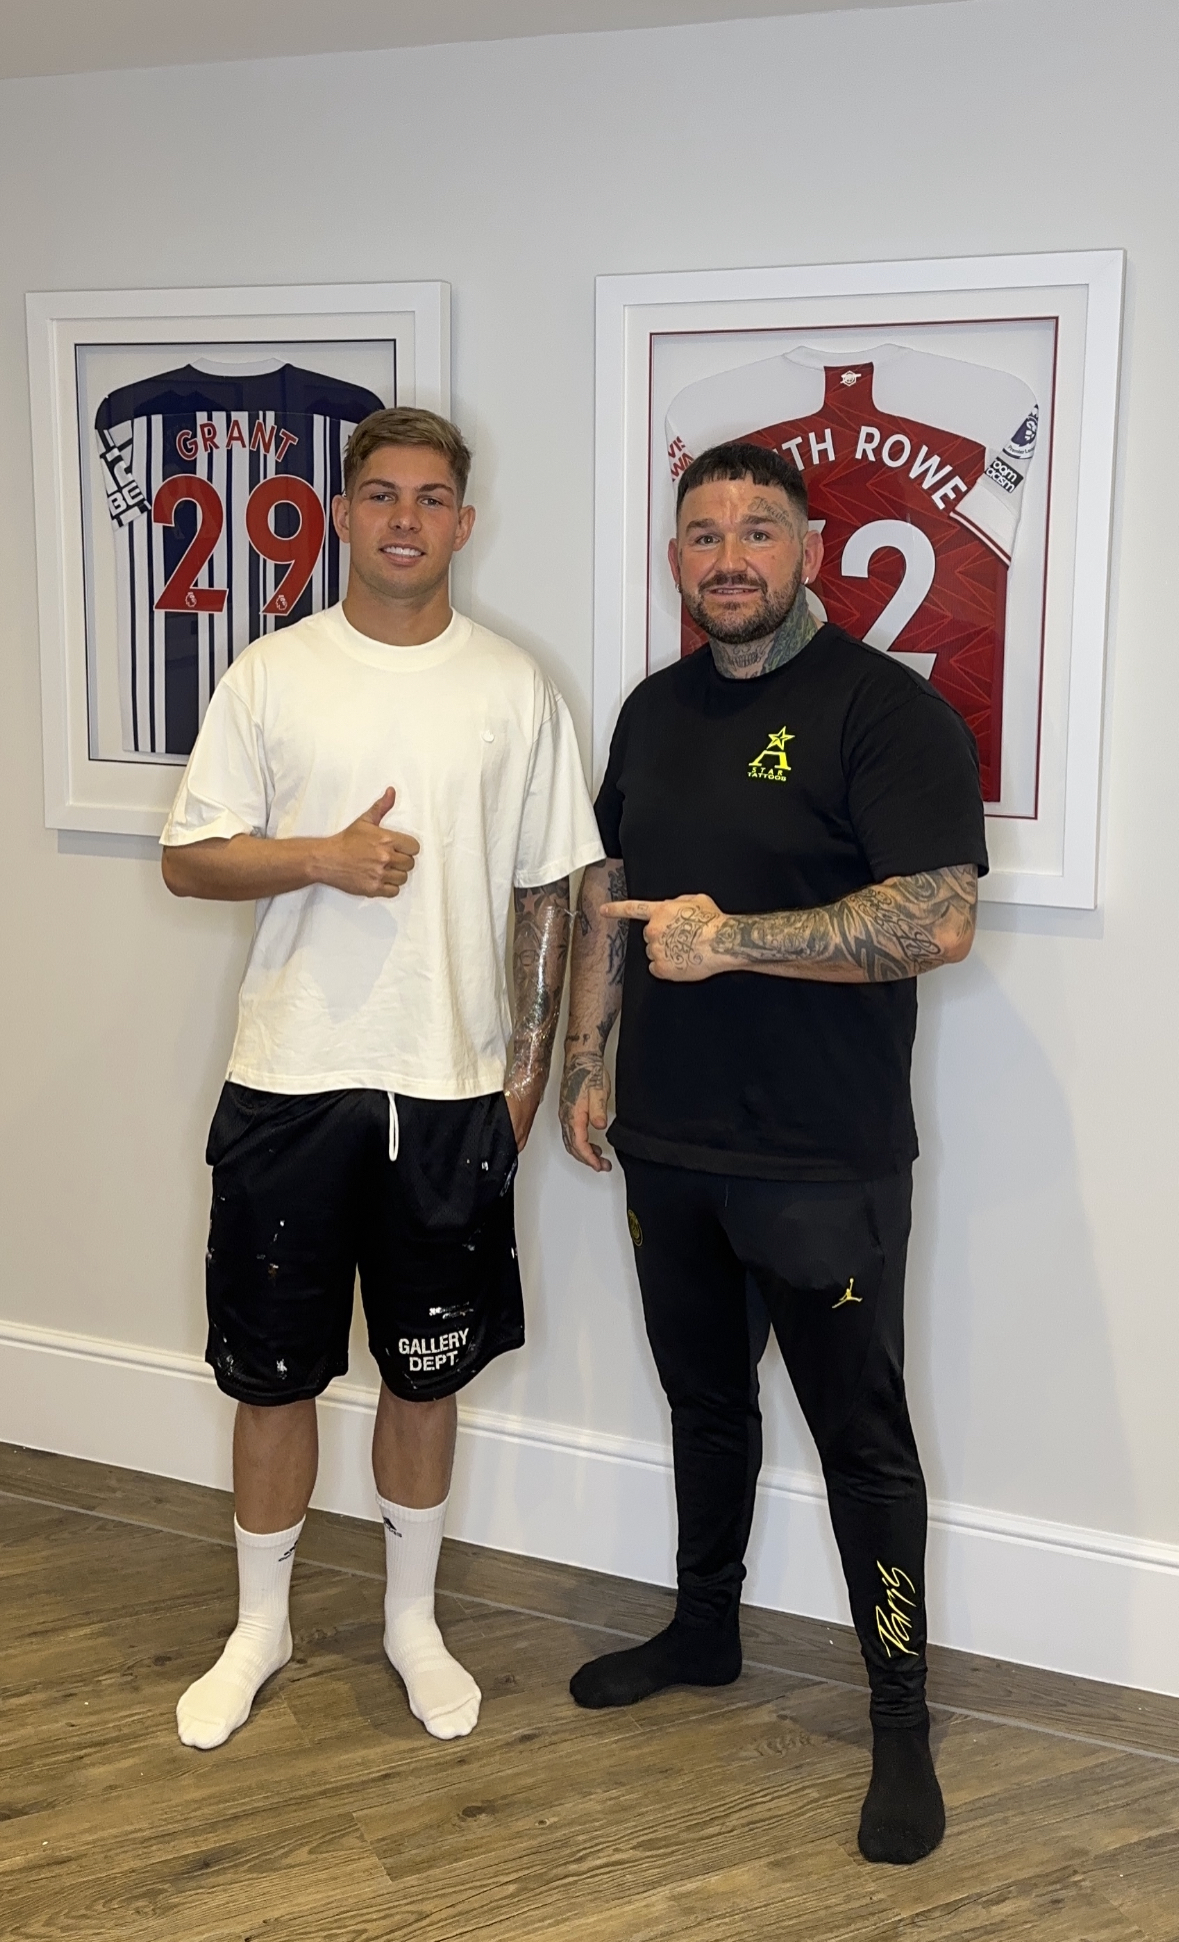 The tattoo artist pictures with Arsenal's Emile Smith Rowe